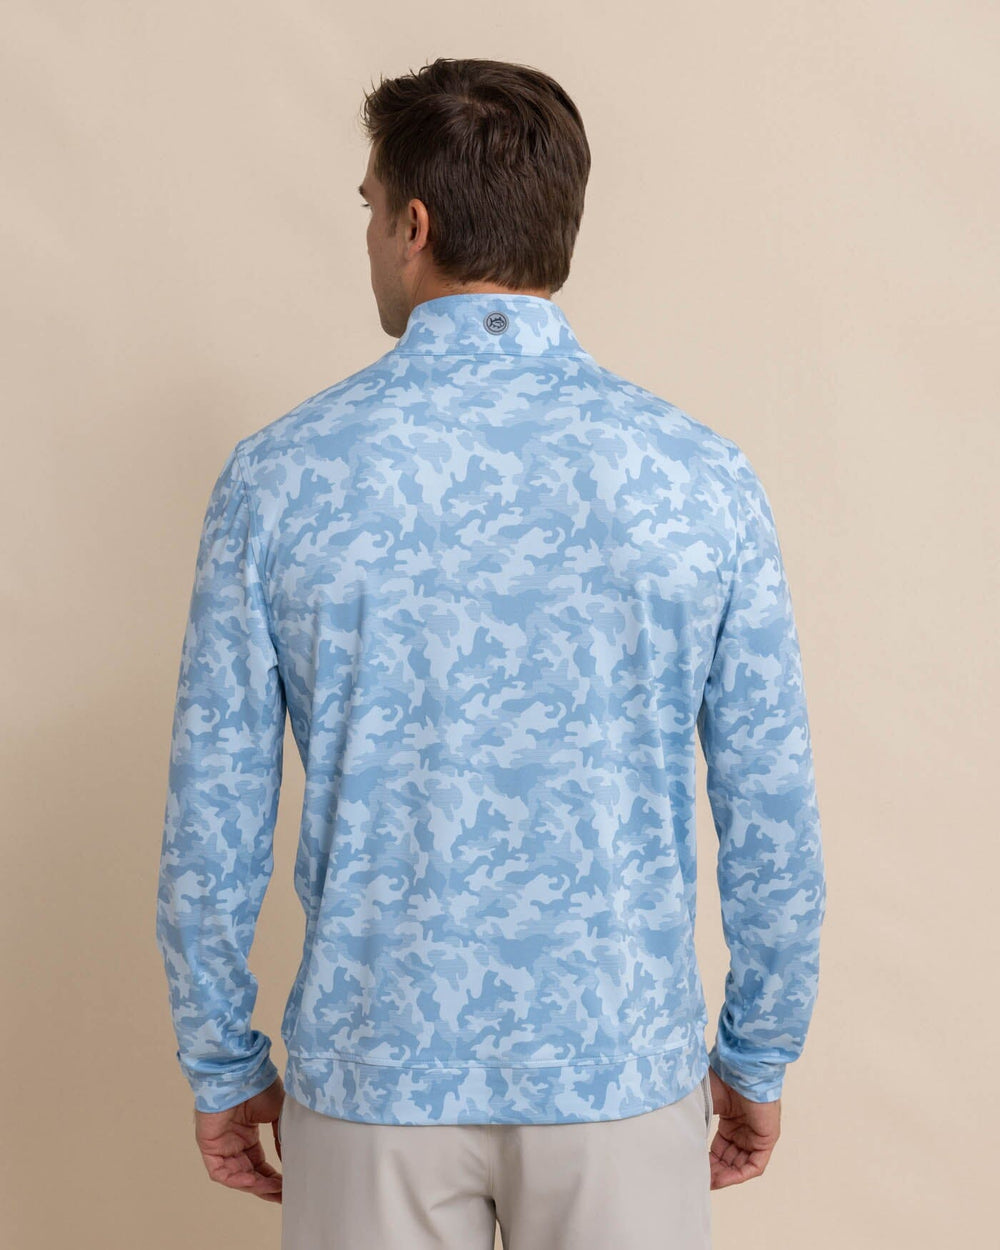 The back view of the Southern Tide Island Camo Print Cruiser Quarter Zip by Southern Tide - Clearwater Blue